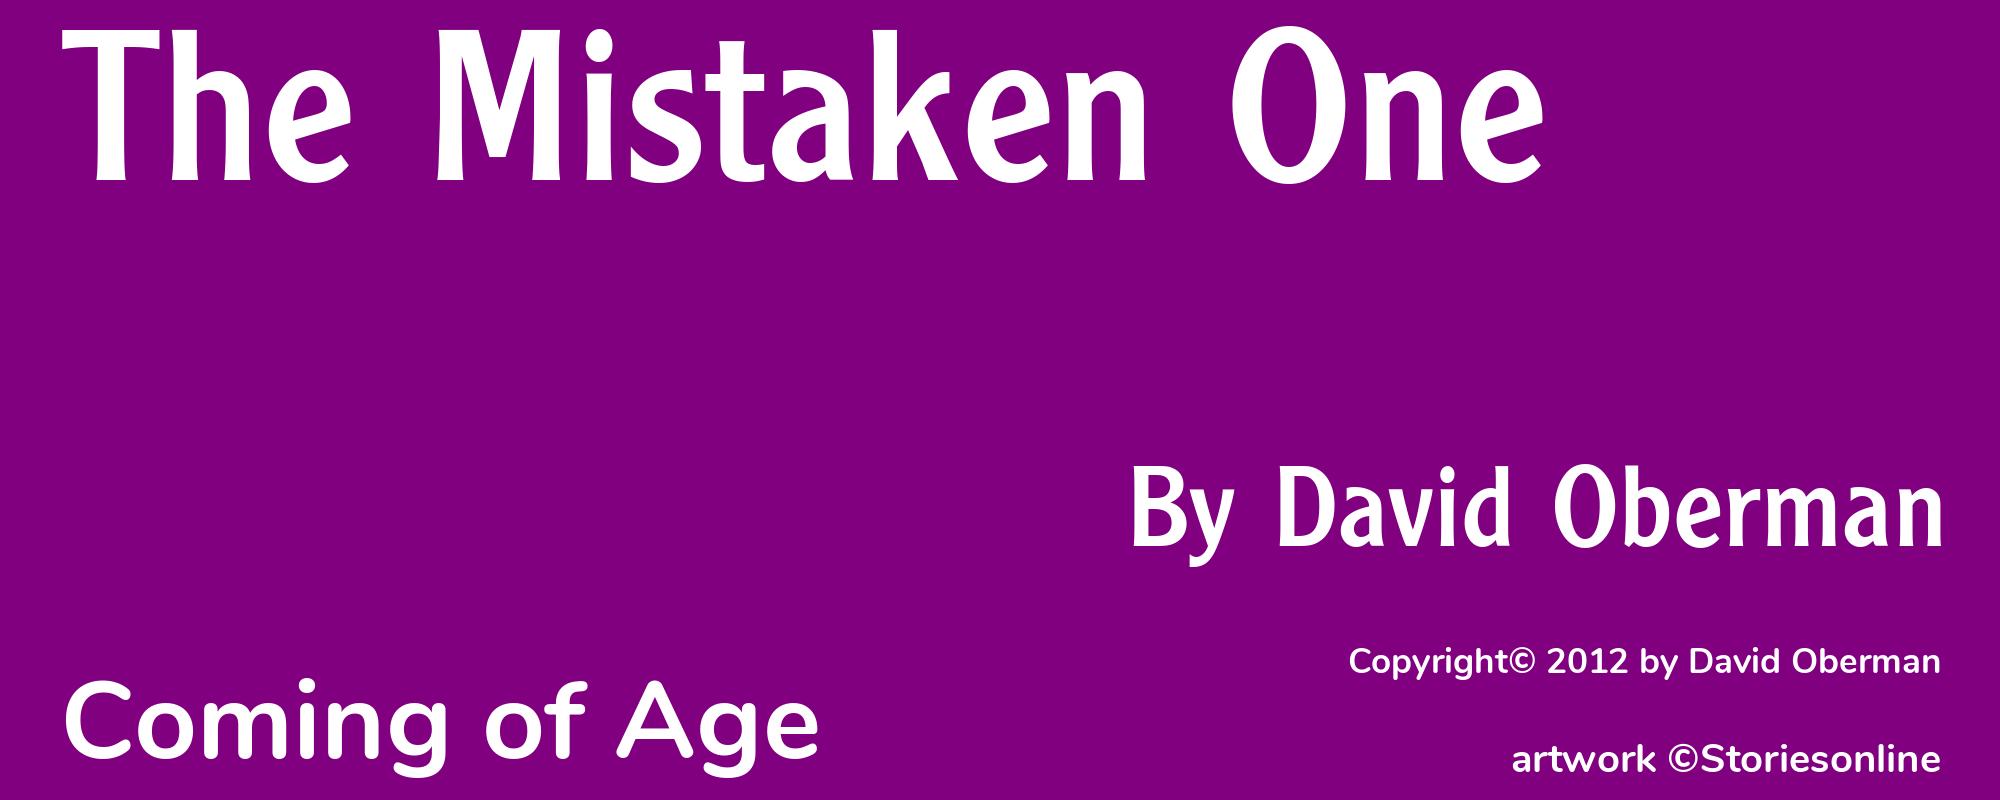 The Mistaken One - Cover